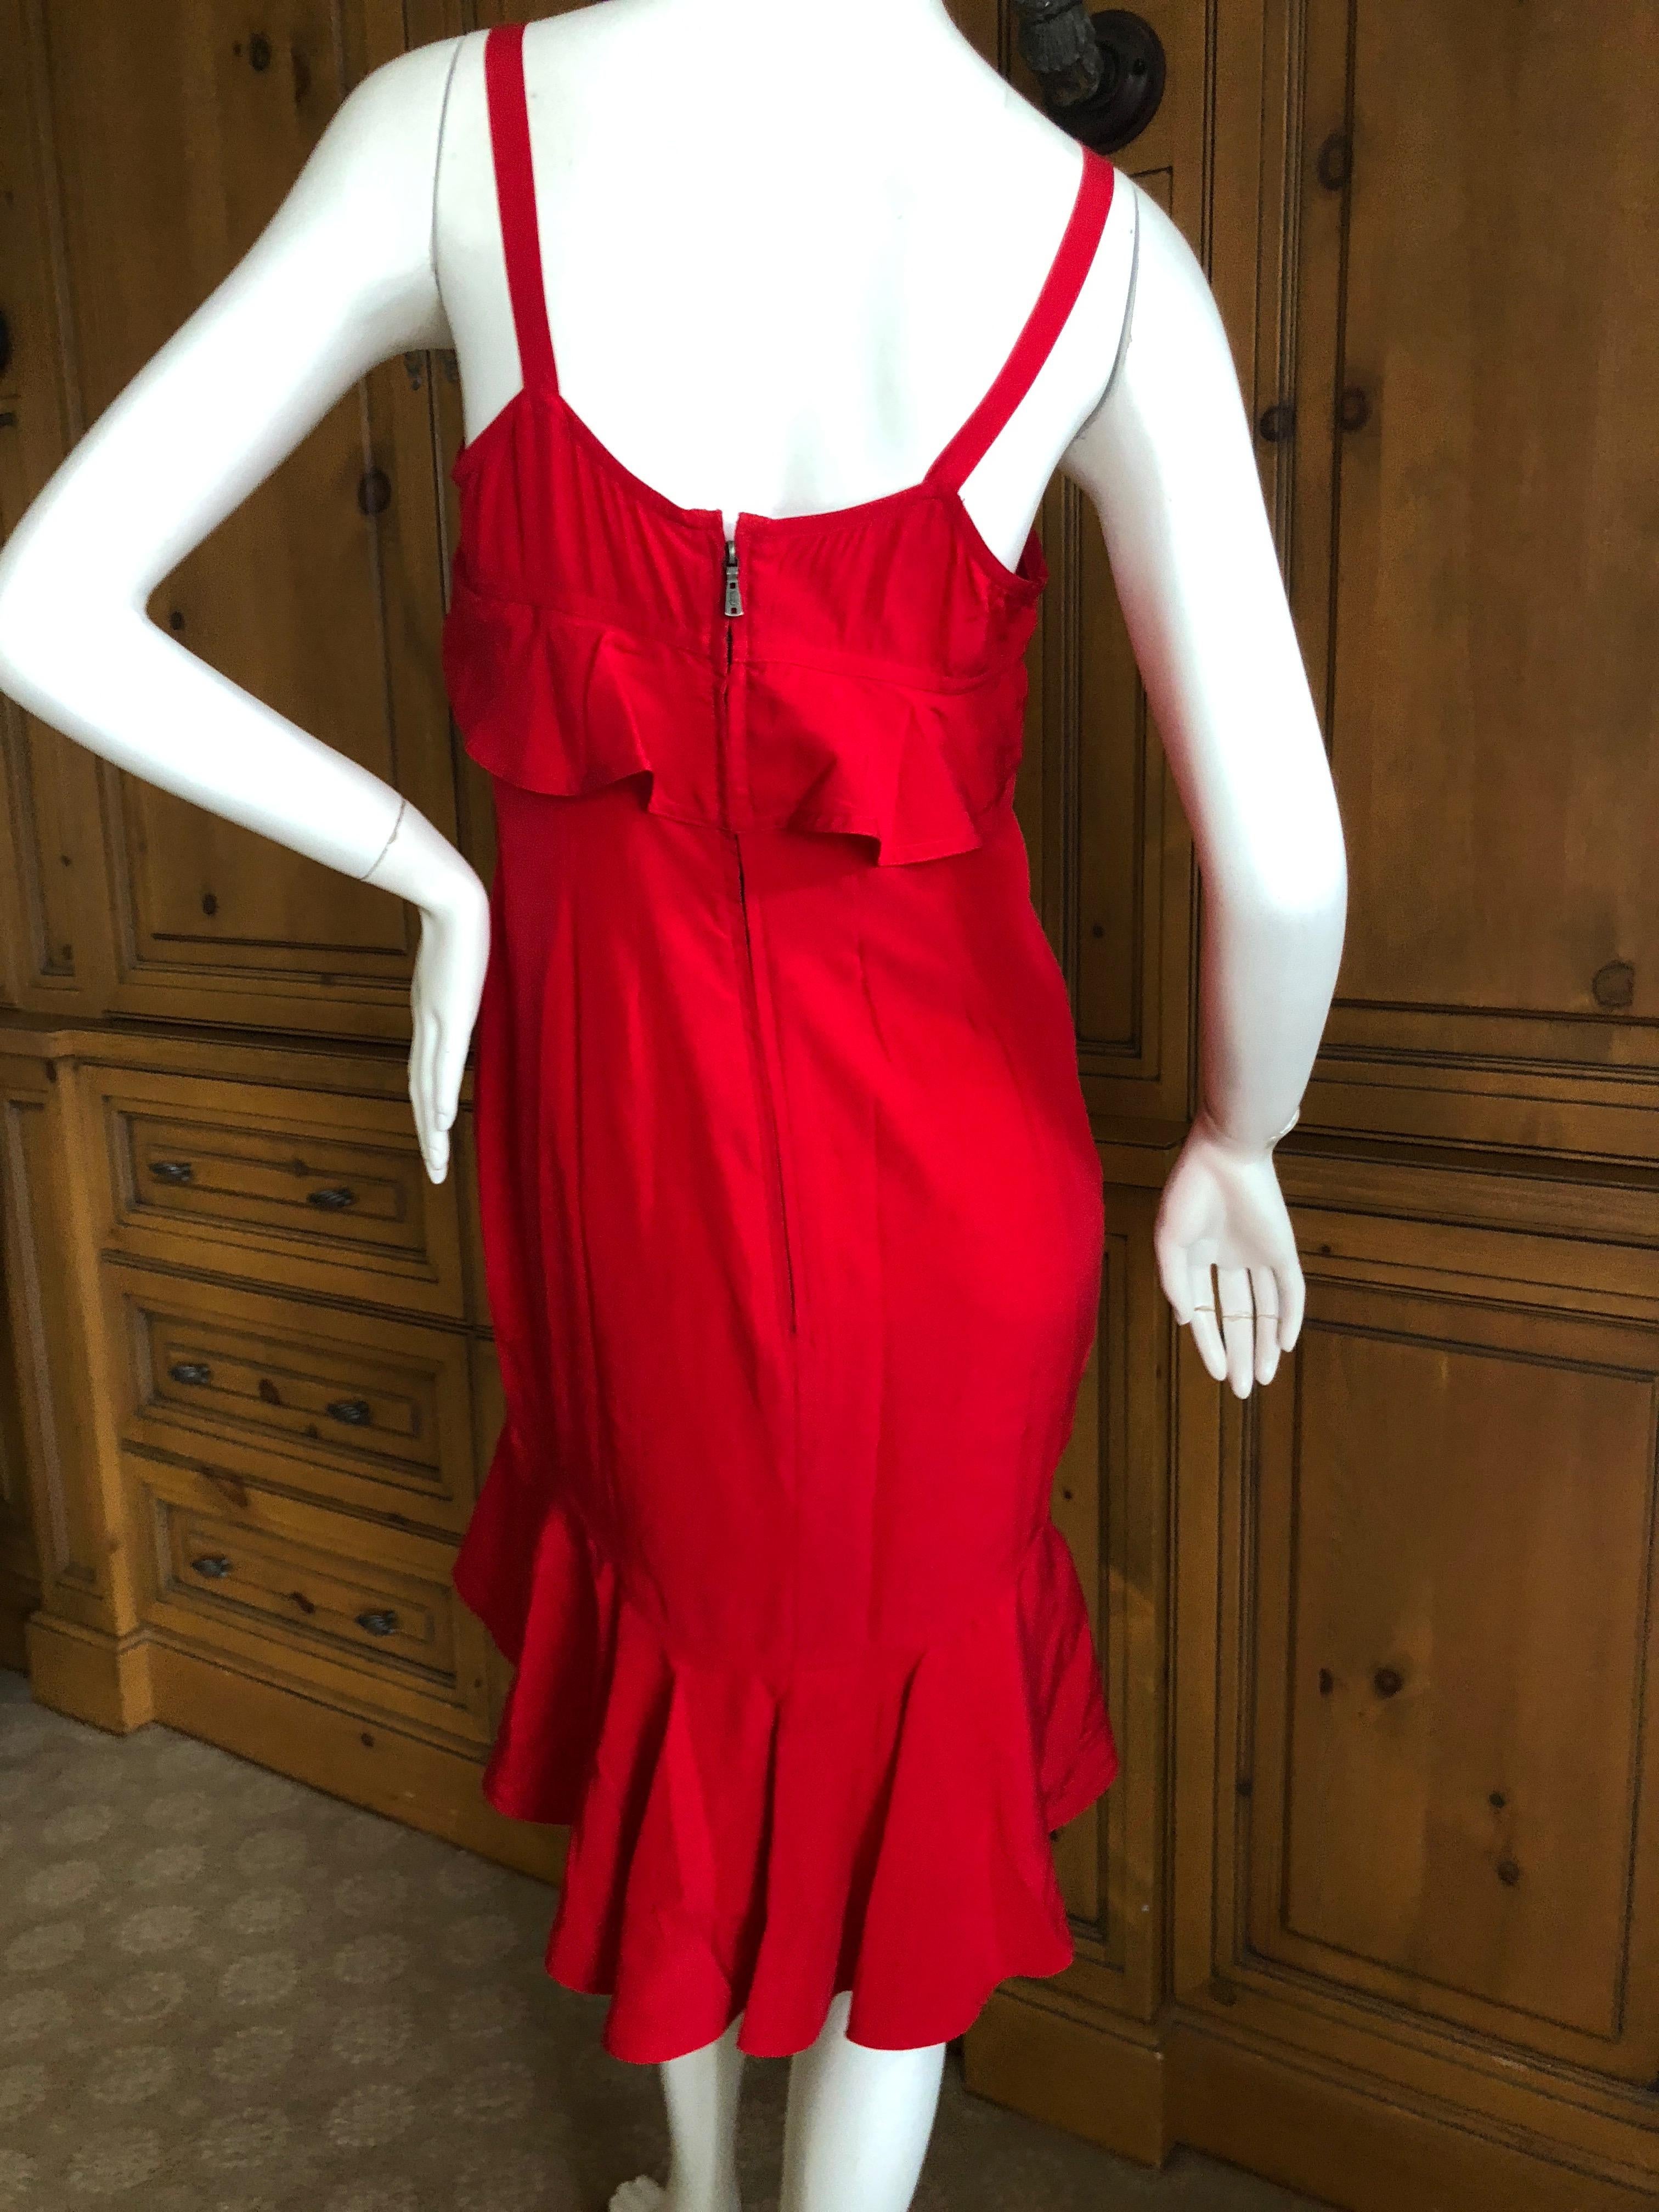 Yves Saint Laurent Tom Ford Fall 2003 Look 1 Red Ruffle Dress For Sale 2